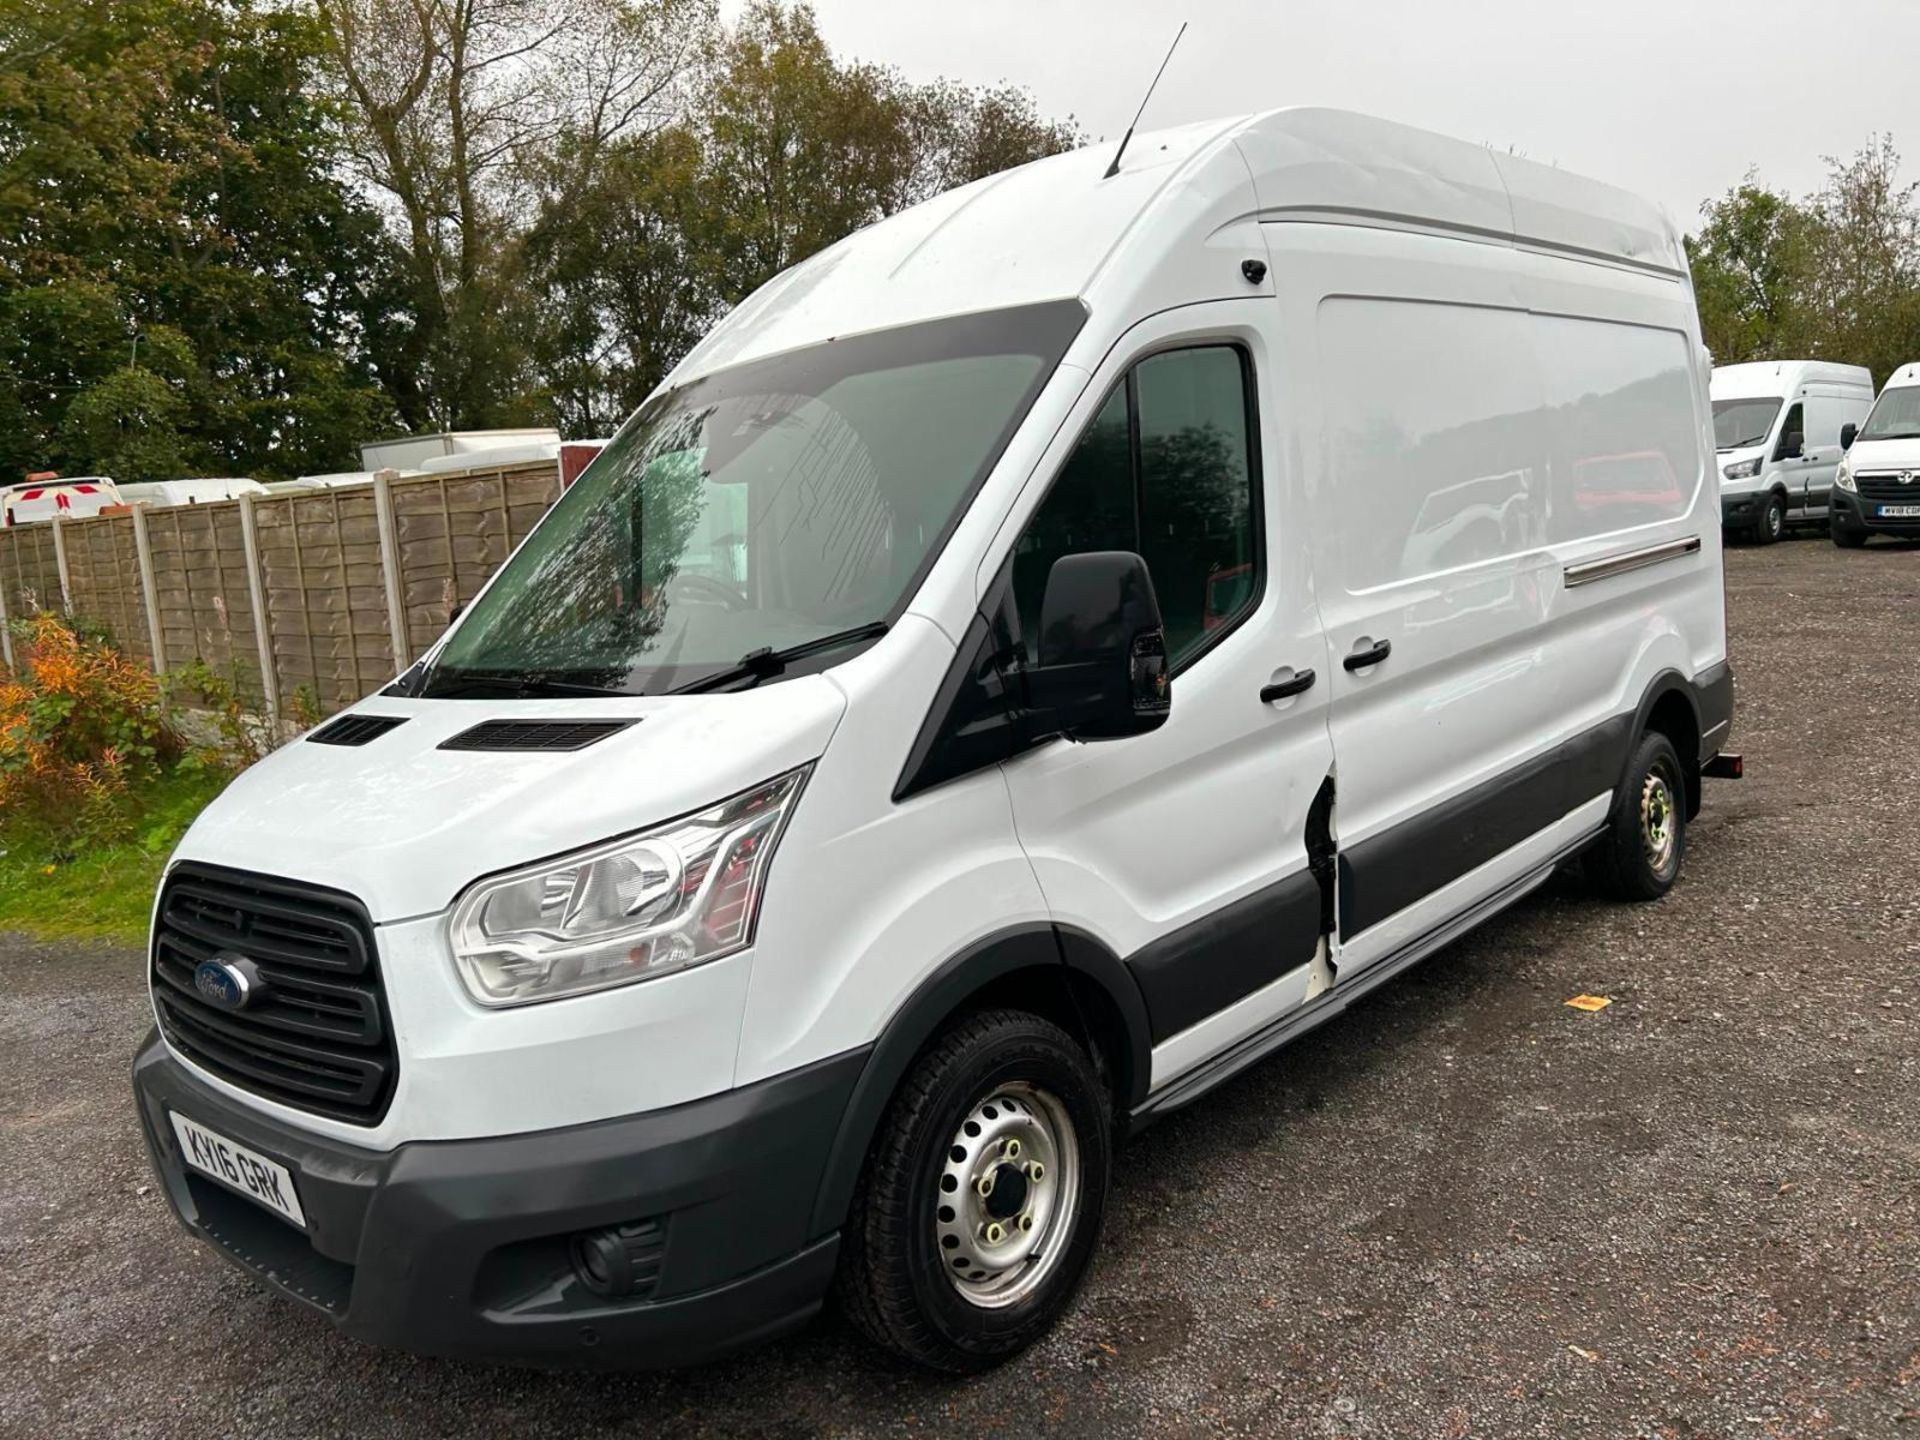 RELIABLE WORKHORSE: 2016 FORD TRANSIT 2.2 TDCI L3 H3 PANEL VAN - Image 9 of 12